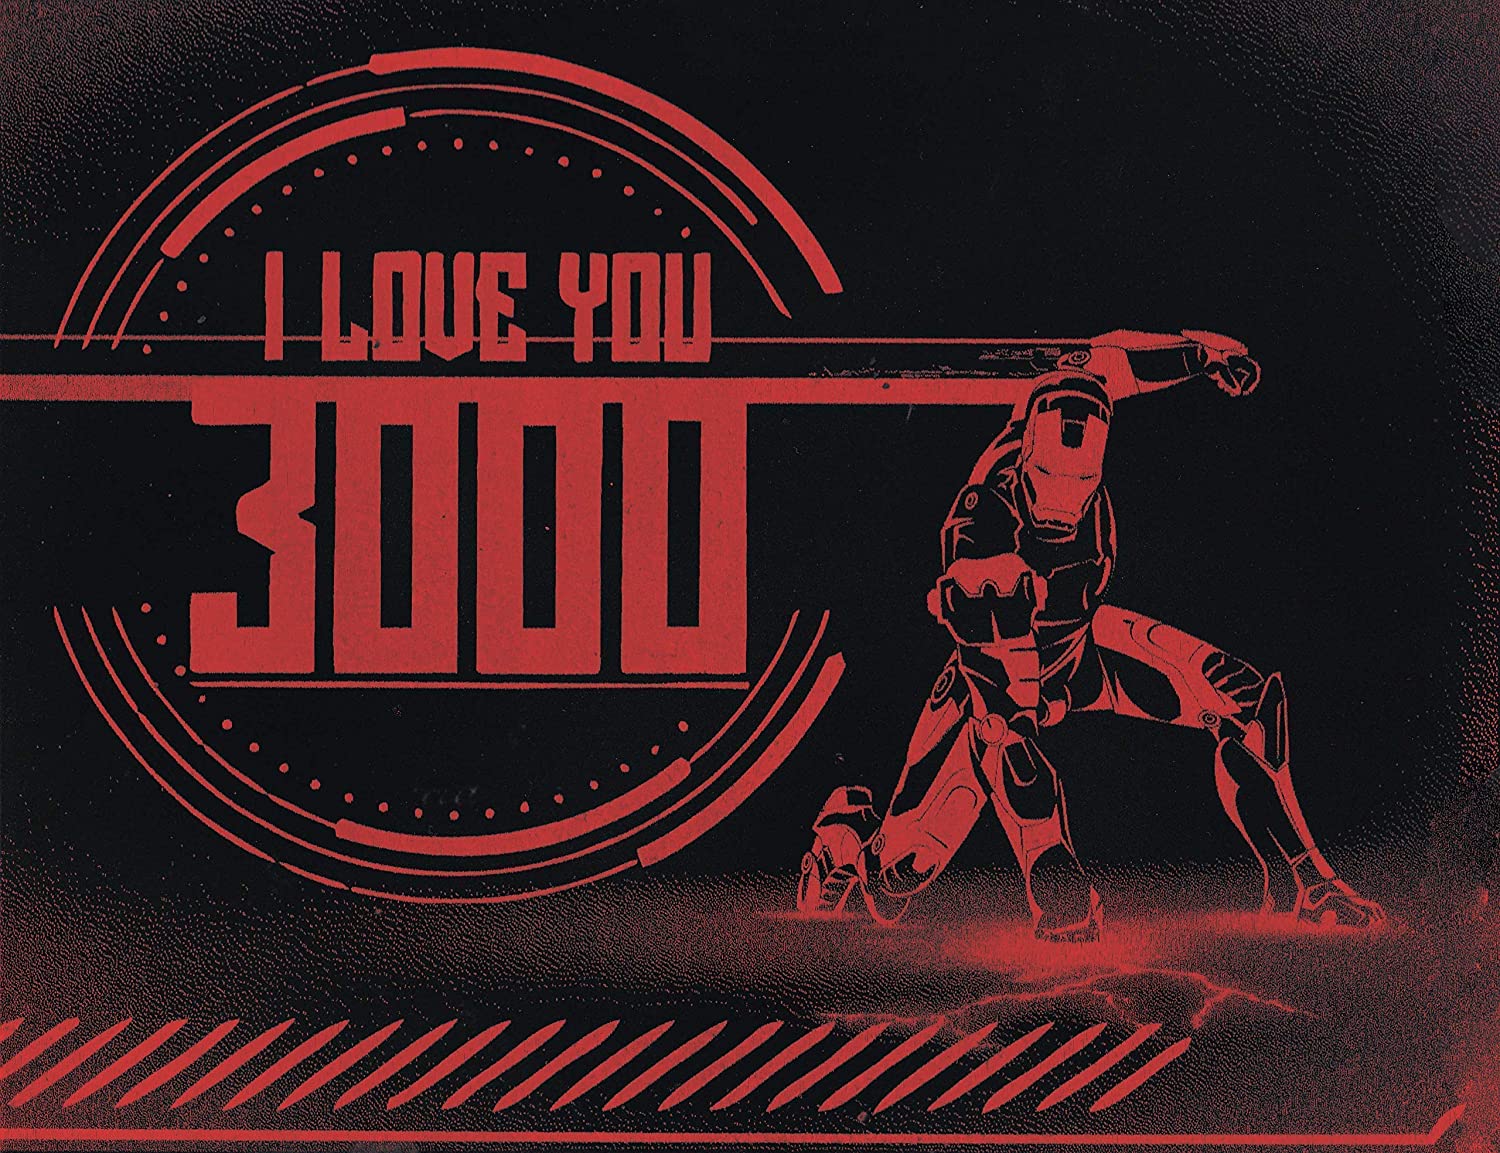 I Love You 3000 Iron Man Poster, Handmade Products